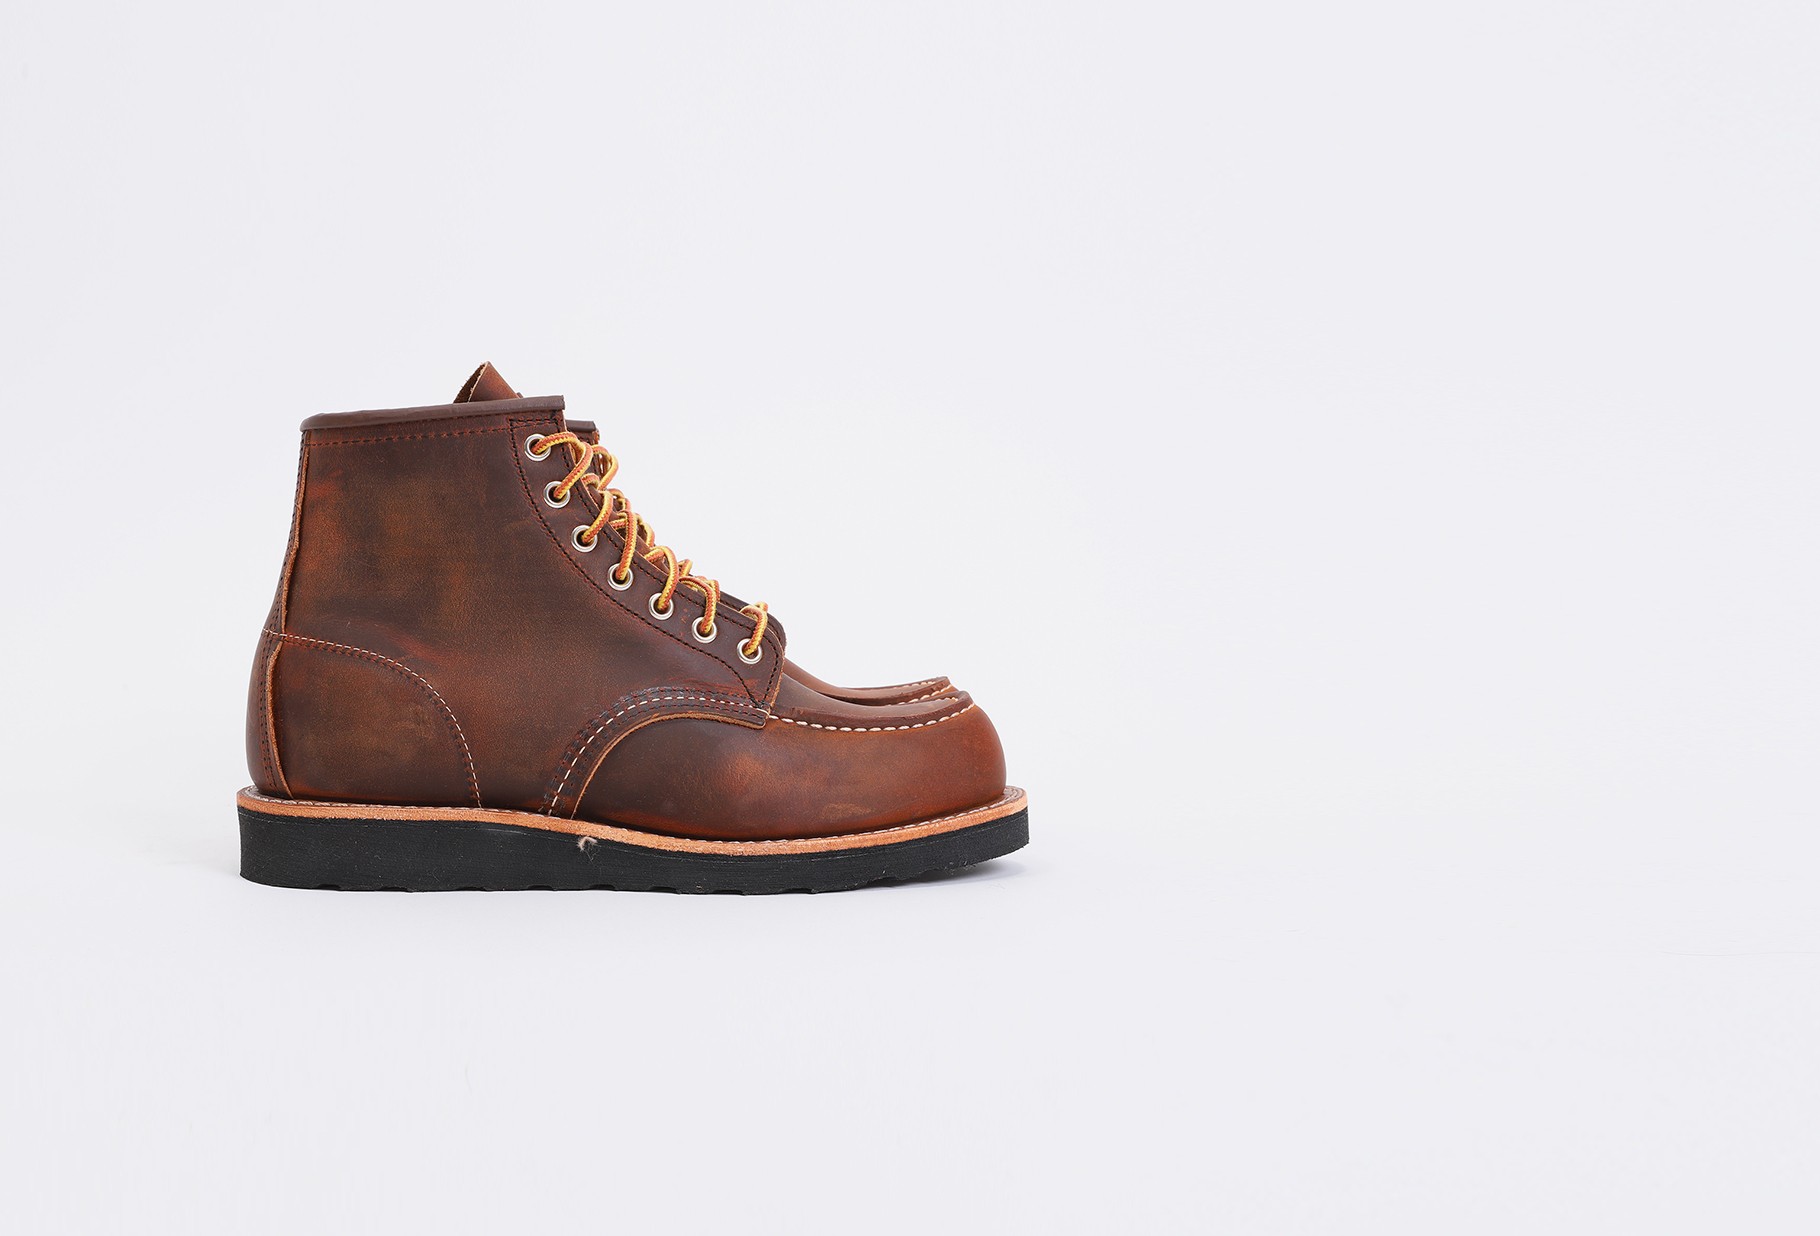 RED WING / Moc toe 6'' style no.8886 Copper